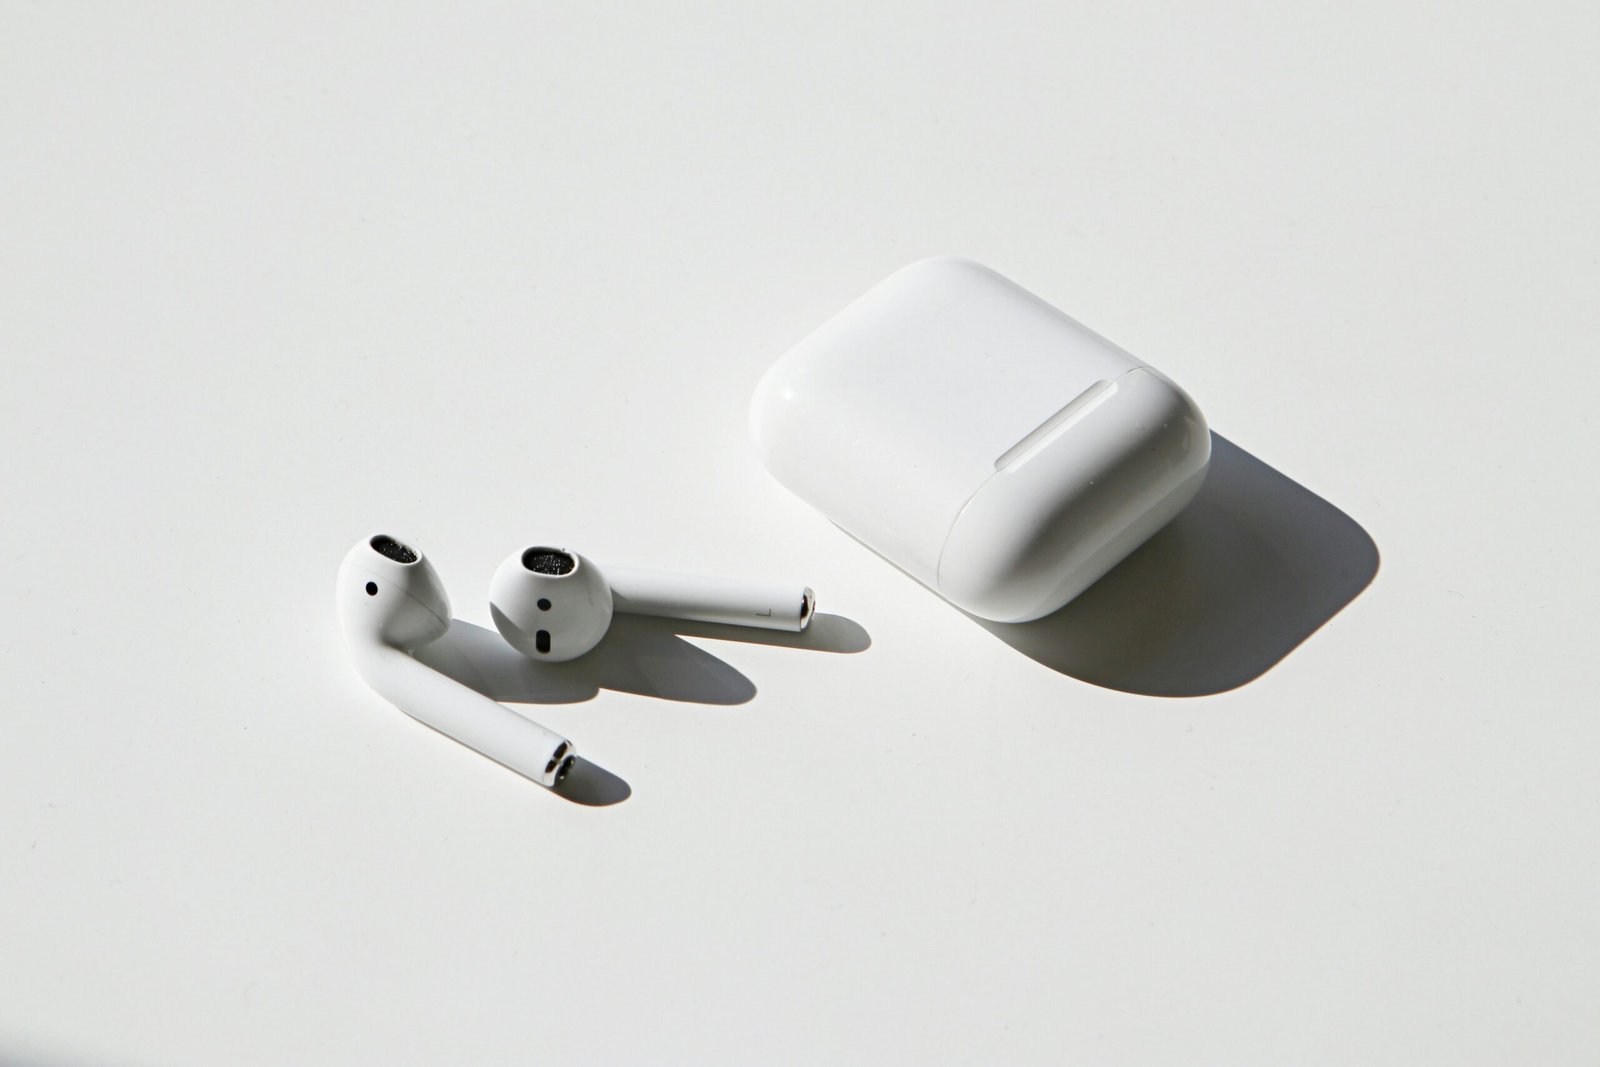 How to Connect Airpods to a Windows Laptop